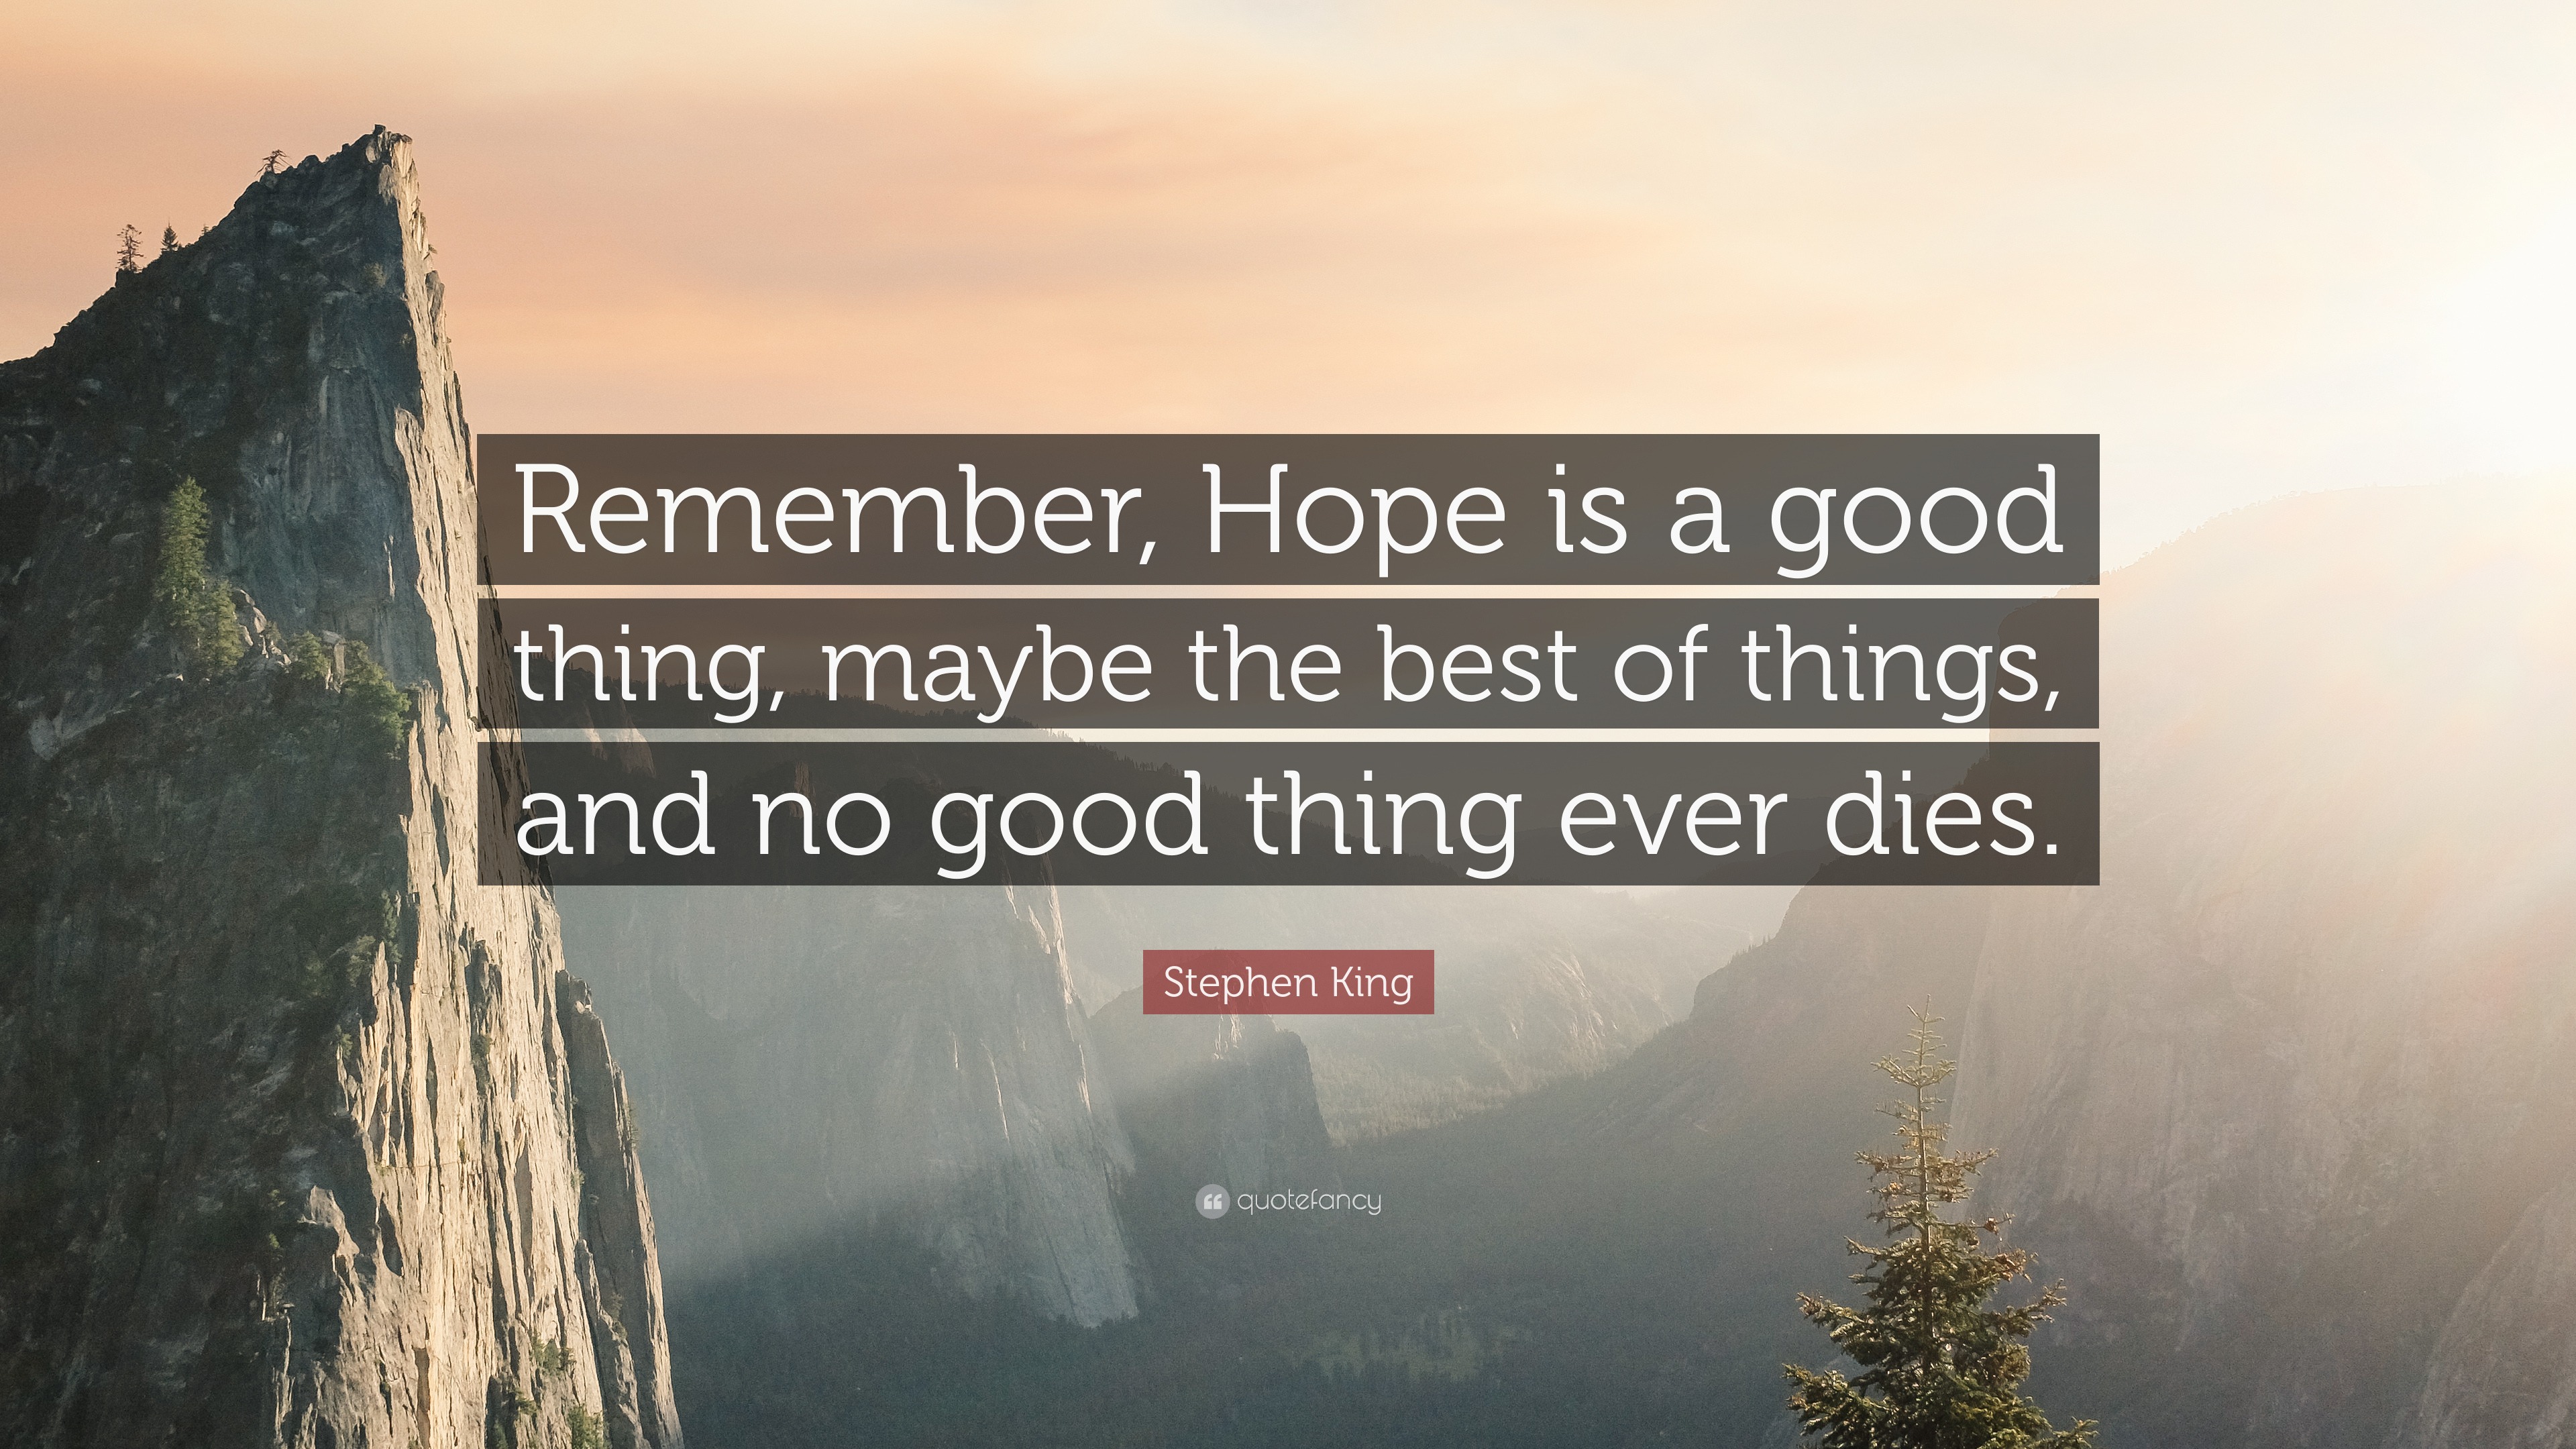 Stephen King Quote “remember Hope Is A Good Thing Maybe The Best Of Things And No Good Thing